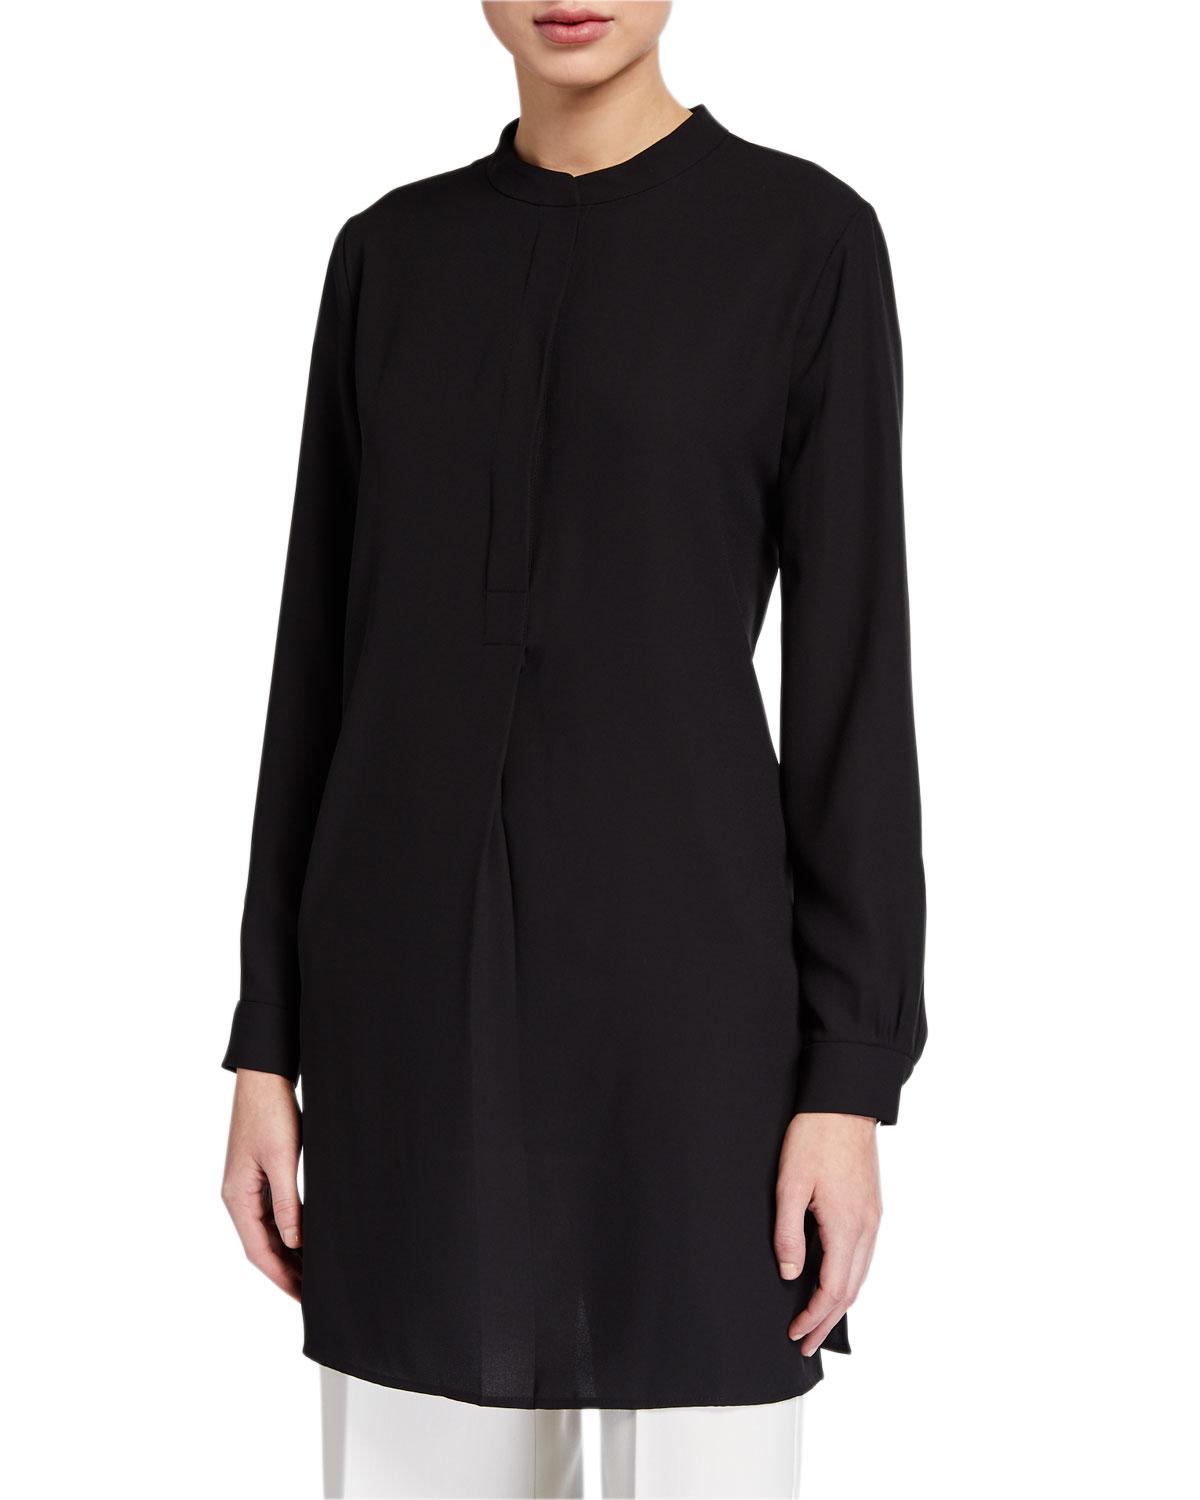 Anne Klein Synthetic Long-sleeve Tunic Shirt in Black - Lyst